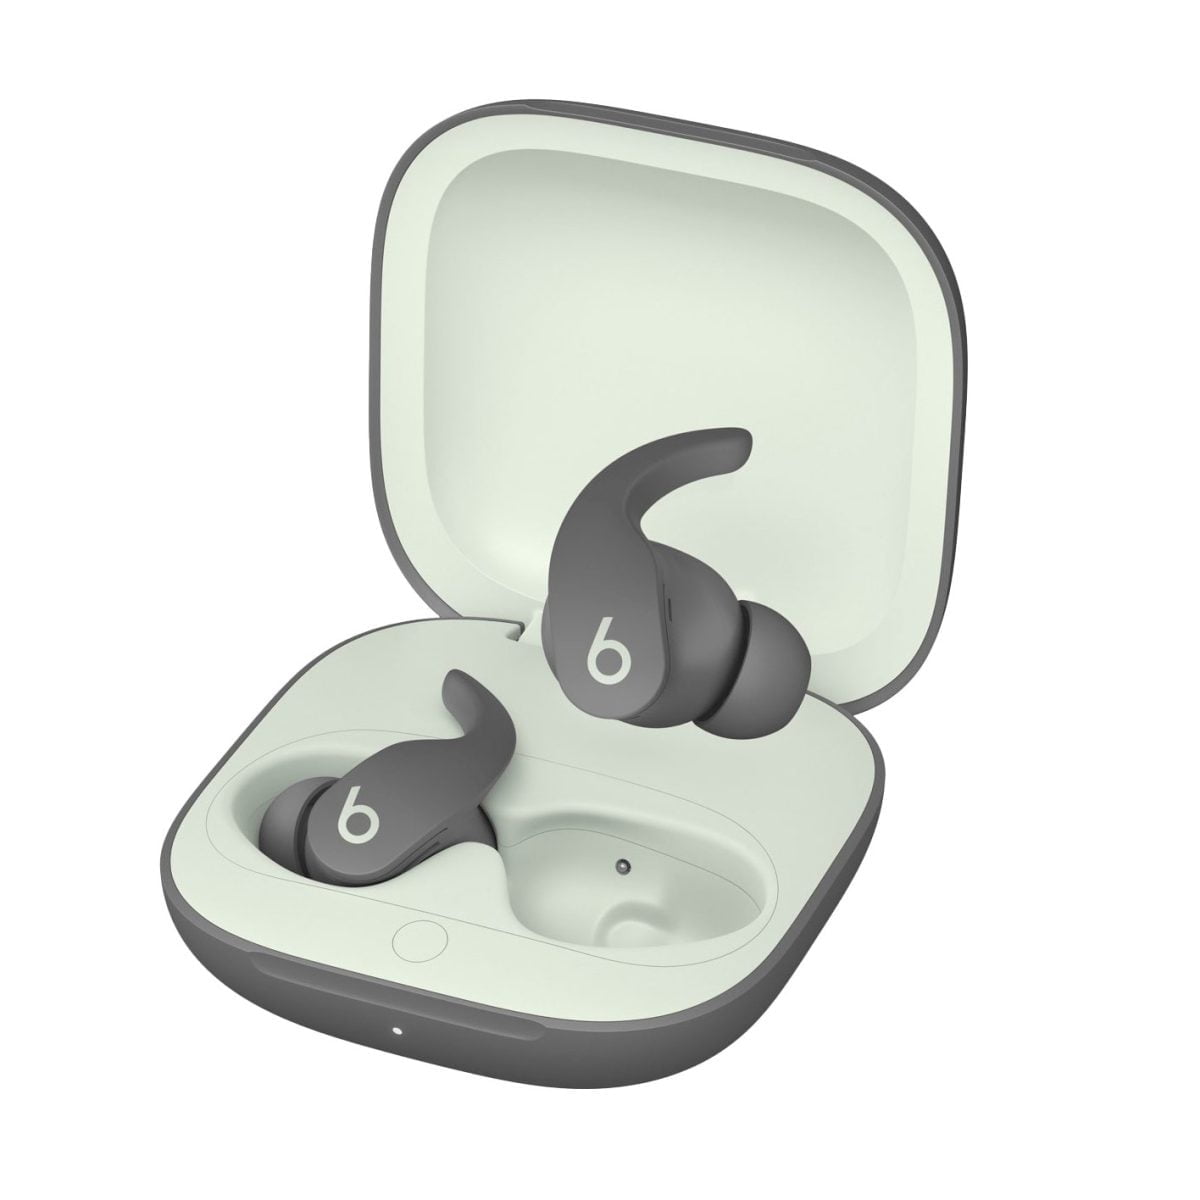 6490271 Rd Beats &Amp;Lt;H1&Amp;Gt;Beats Fit Pro True Wireless Noise Cancelling In-Ear Headphones - Sage Gray&Amp;Lt;/H1&Amp;Gt; Https://Www.youtube.com/Watch?V=Kzzb-Qssefg &Amp;Lt;Div Class=&Amp;Quot;Features-List-Container&Amp;Quot;&Amp;Gt; &Amp;Lt;Div Class=&Amp;Quot;Features-List All-Features&Amp;Quot;&Amp;Gt; &Amp;Lt;Div Class=&Amp;Quot;List-Row&Amp;Quot;&Amp;Gt; &Amp;Lt;H4 Class=&Amp;Quot;Feature-Title Body-Copy V-Fw-Medium&Amp;Quot;&Amp;Gt;&Amp;Lt;/H4&Amp;Gt; &Amp;Lt;P Class=&Amp;Quot;Body-Copy&Amp;Quot;&Amp;Gt;Beats Fit Pro Is Engineered To Deliver Powerful, Balanced Sound Via A Custom Acoustic Platform That Stays With You Through Your Daily Activities.a Proprietary, Dual-Element Diaphragm Driver Resides Within A Twochamber Housing Inside The Bluetooth® Earbuds, Resulting In Clear Sound With Outstanding Stereo Separation. An Advanced Digital Processor Then Optimizes Audio Performance For Loudness And Clarity, While Simultaneously Ensuring Clean Noise-Cancellation.beats Fit Pro Supports Spatial Audio With Dynamic Head Tracking For Immersive Music, Movies, And Games. Dynamic Head Tracking Uses Gyroscopes And Accelerometers To Adjust The Sound As You Turn Your Head, For A Multi-Dimensional Experience That Makes You Feel Like You’re Inside Of It.&Amp;Lt;/P&Amp;Gt; &Amp;Lt;/Div&Amp;Gt; &Amp;Lt;/Div&Amp;Gt; &Amp;Lt;/Div&Amp;Gt; Beats Fit Pro Beats Fit Pro True Wireless Noise Cancelling In-Ear Headphones - Sage Gray Mk2J3